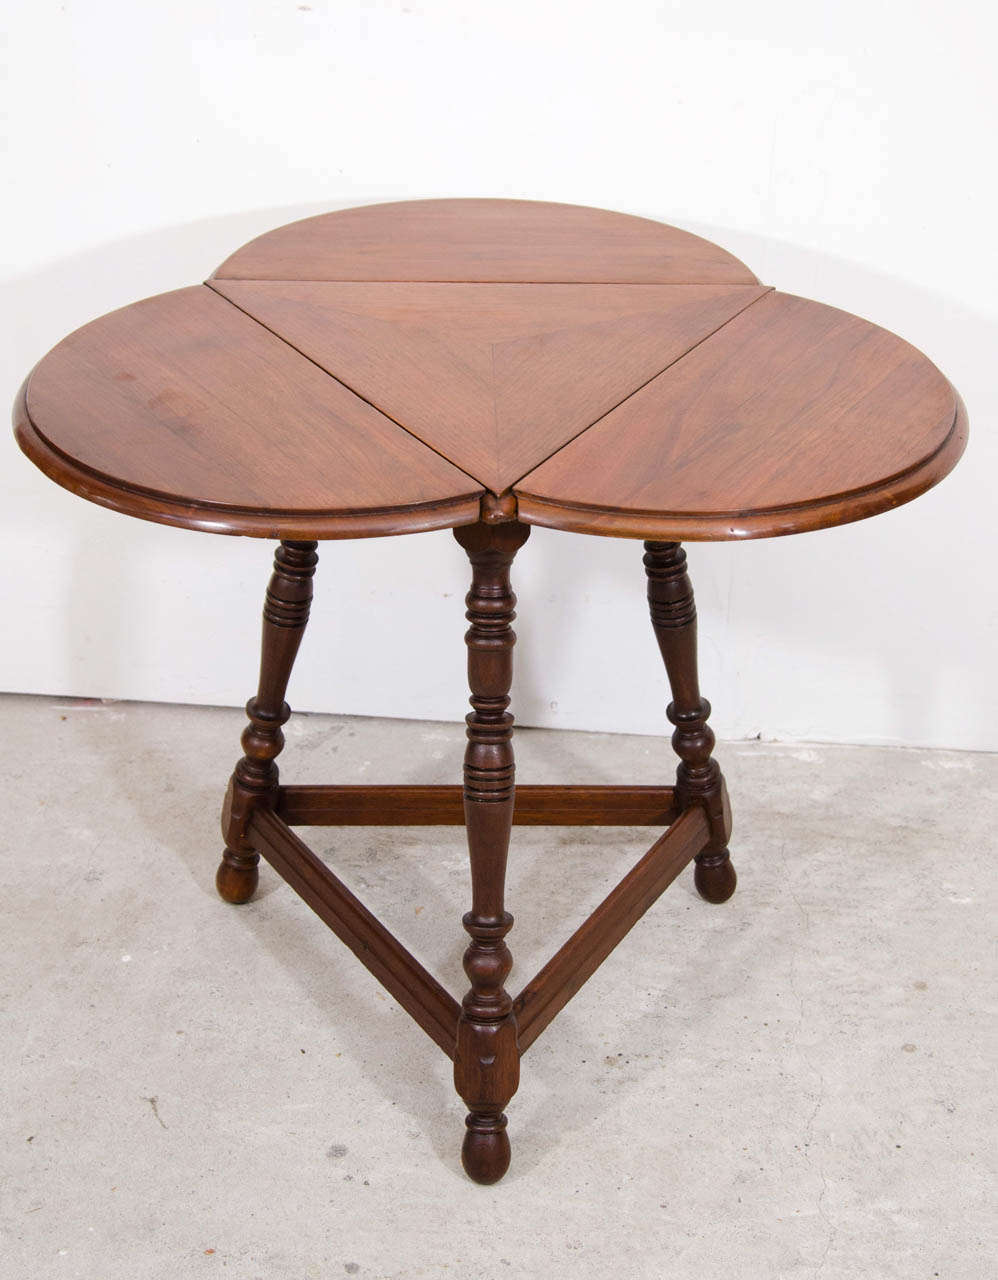 Antique English Walnut Folding Top Cricket Table In Good Condition For Sale In New York, NY